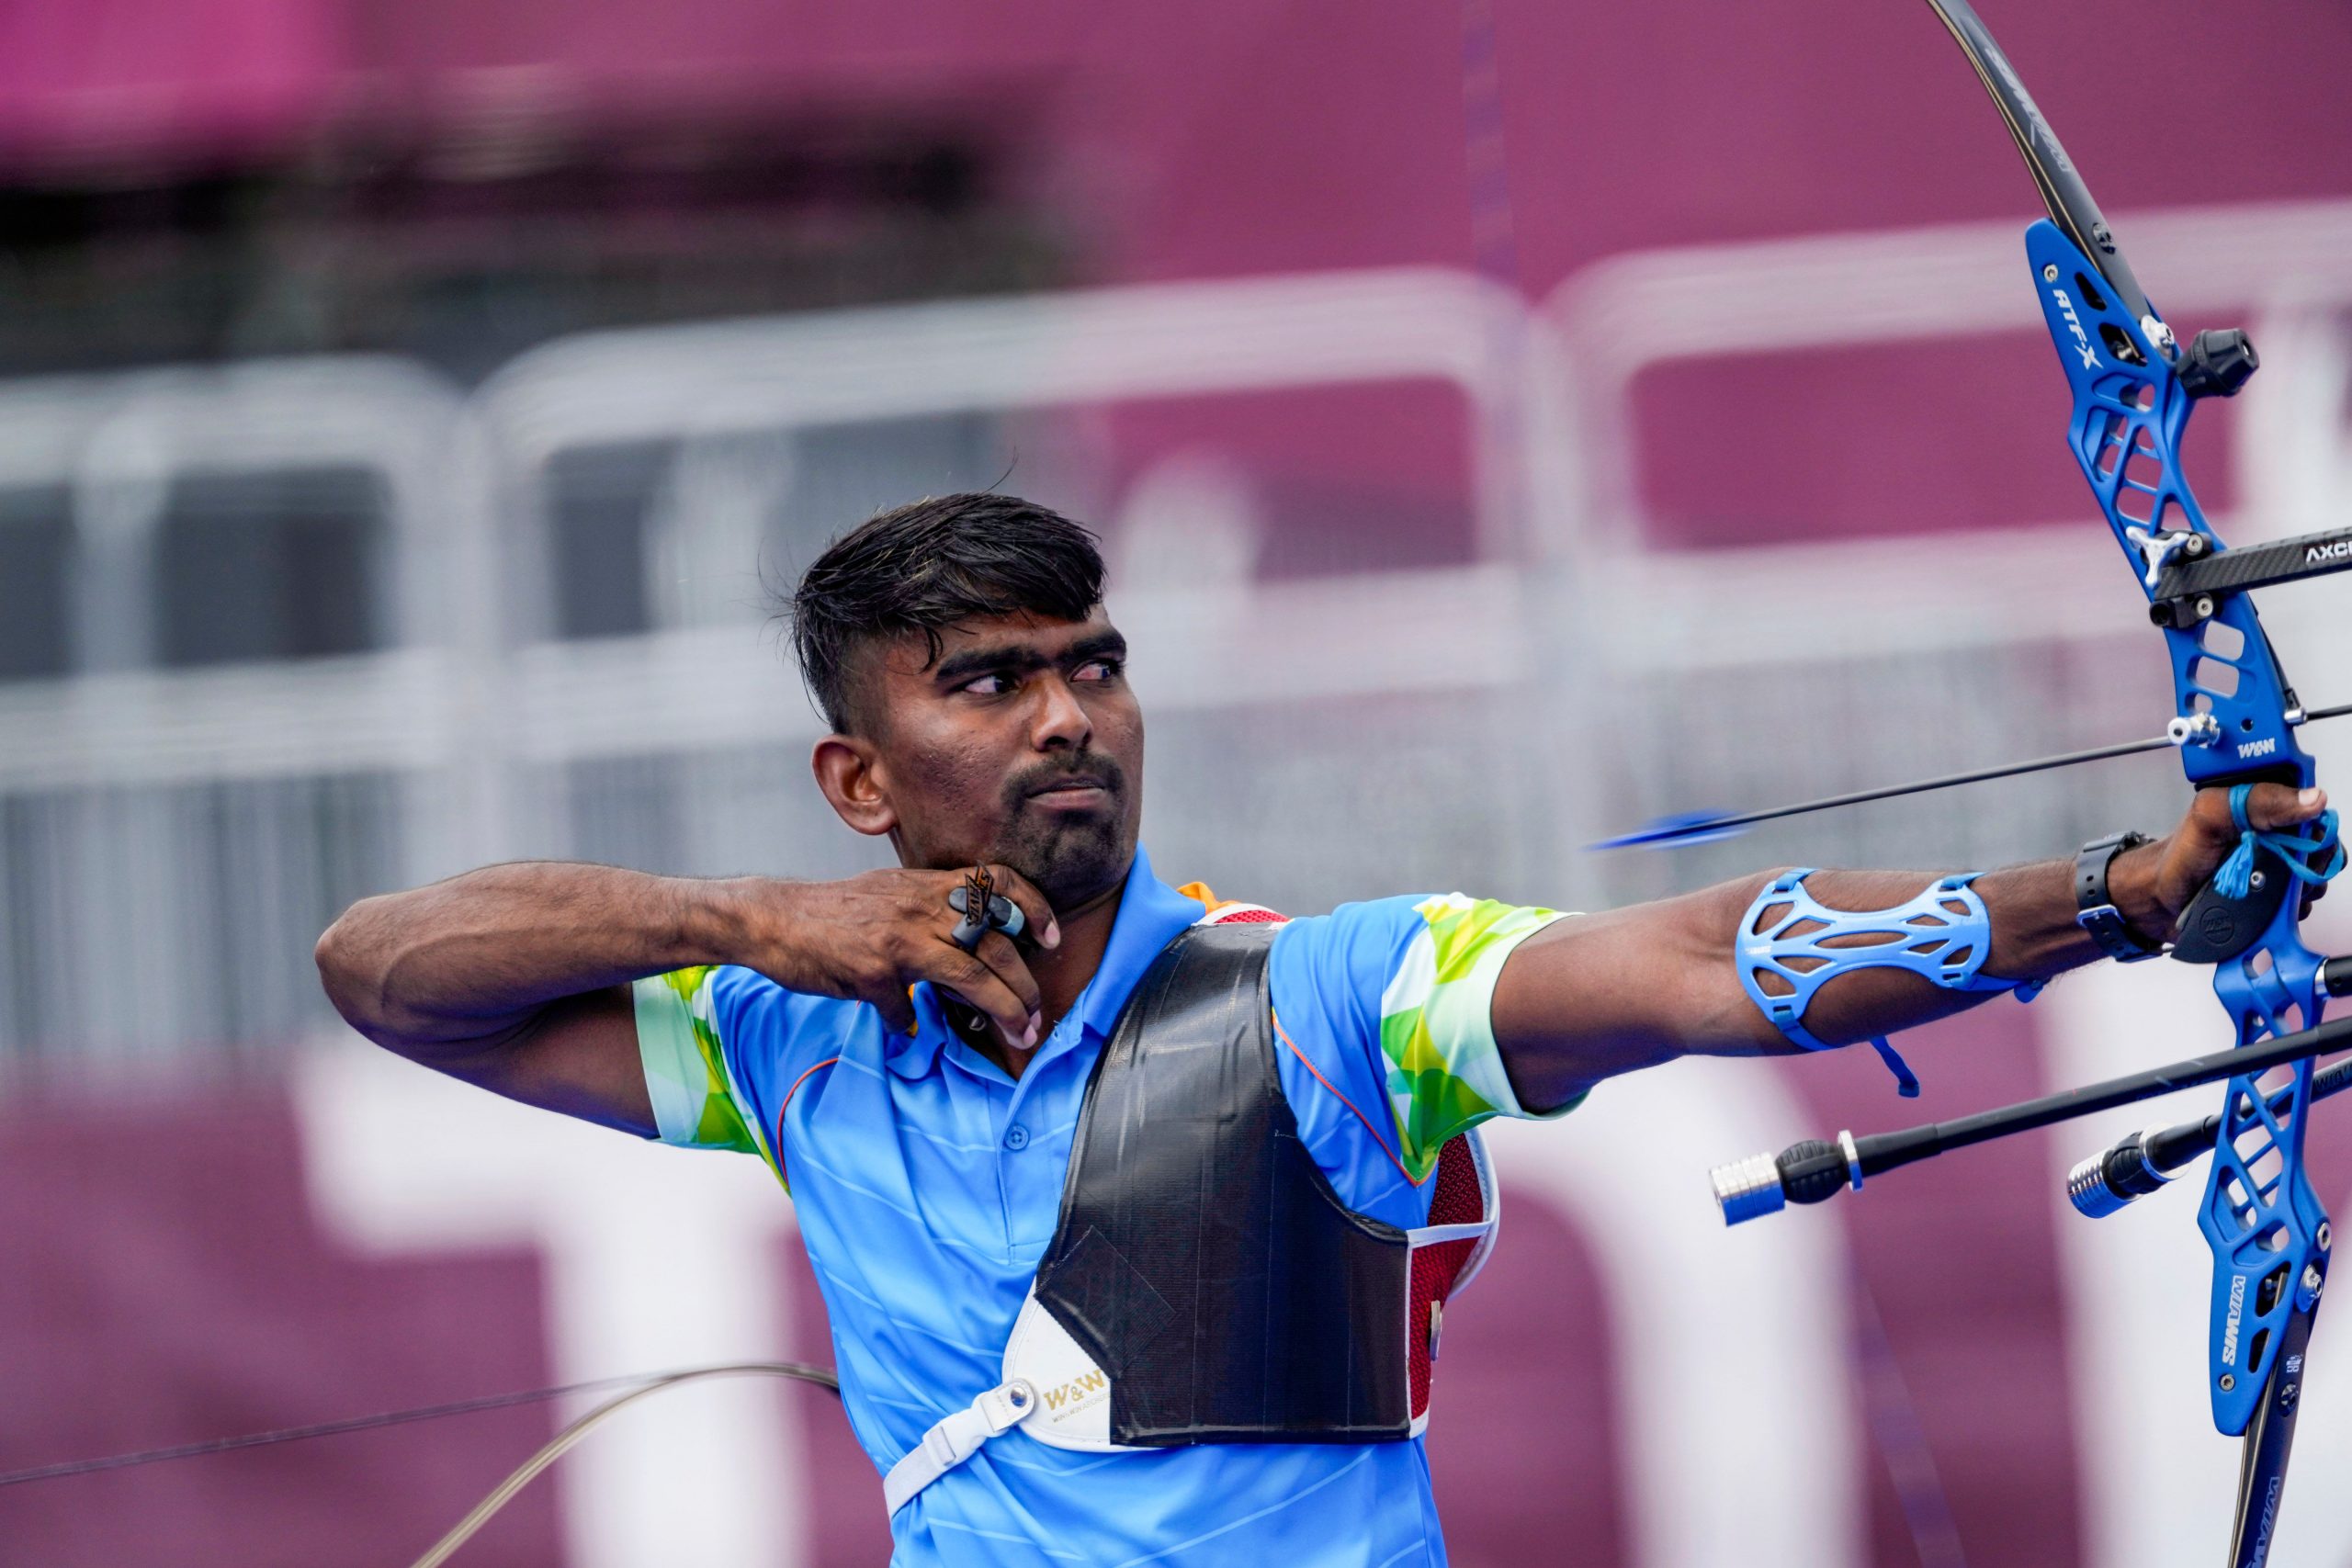 Tokyo Olympics: Archer Pravin loses to World No 1 in men’s 1/16 Eliminations